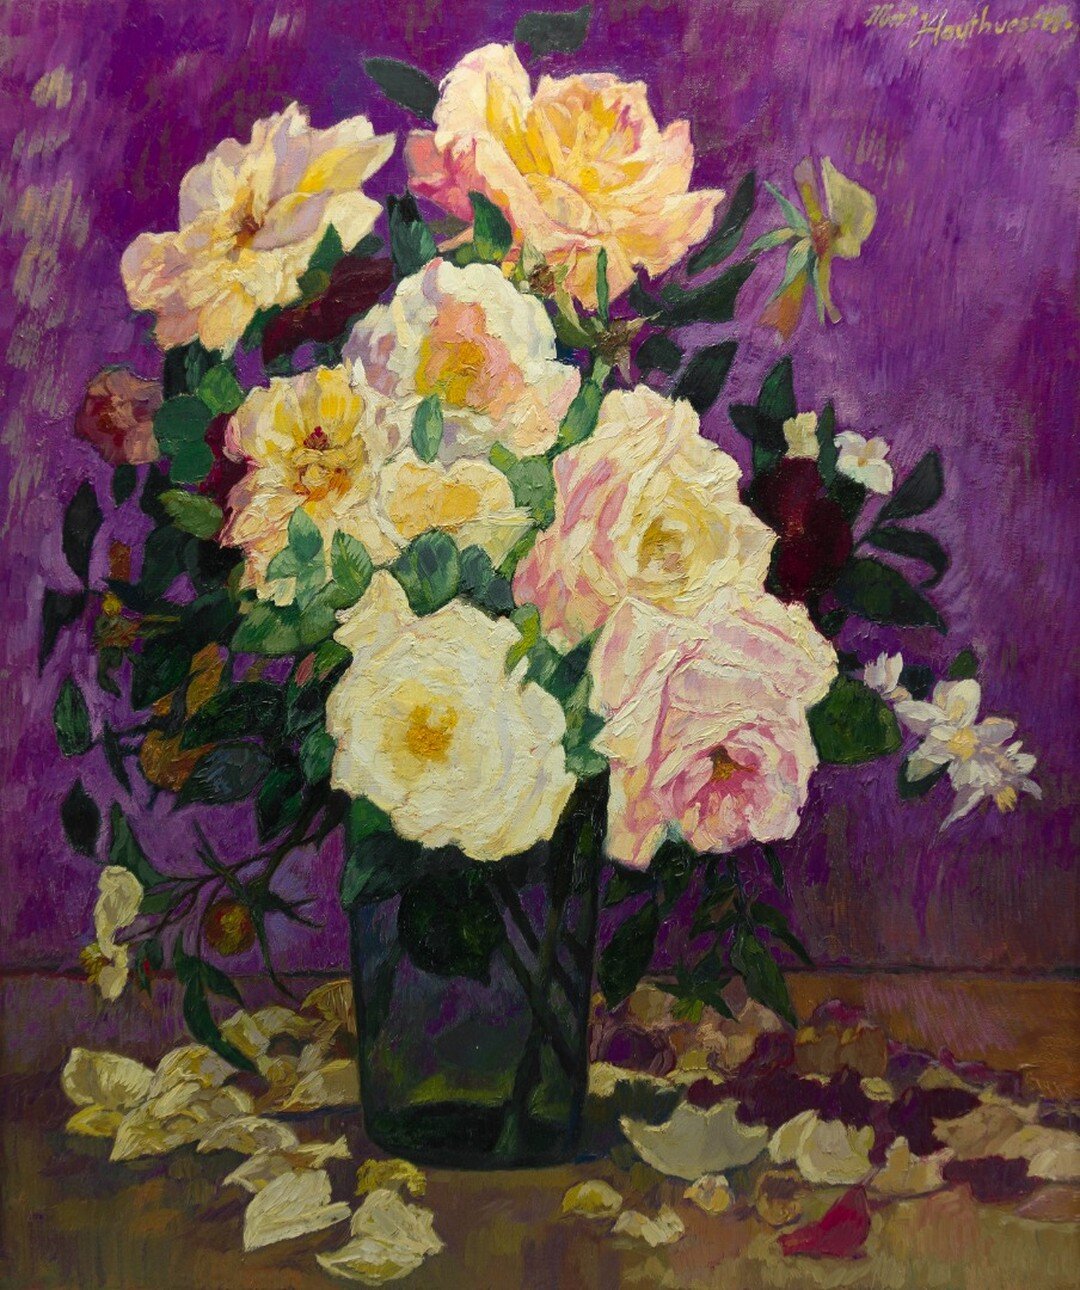 Still life with roses in a vase (c.1951) by Albert Houthuesen (1903-1979)
Oil on canvas 76.3 x 63.4 cm 
Title may be descriptive (taken from printed label on frame). Further info states that this was painted circa 1951 at Oxted.

#houthuesen #alberth